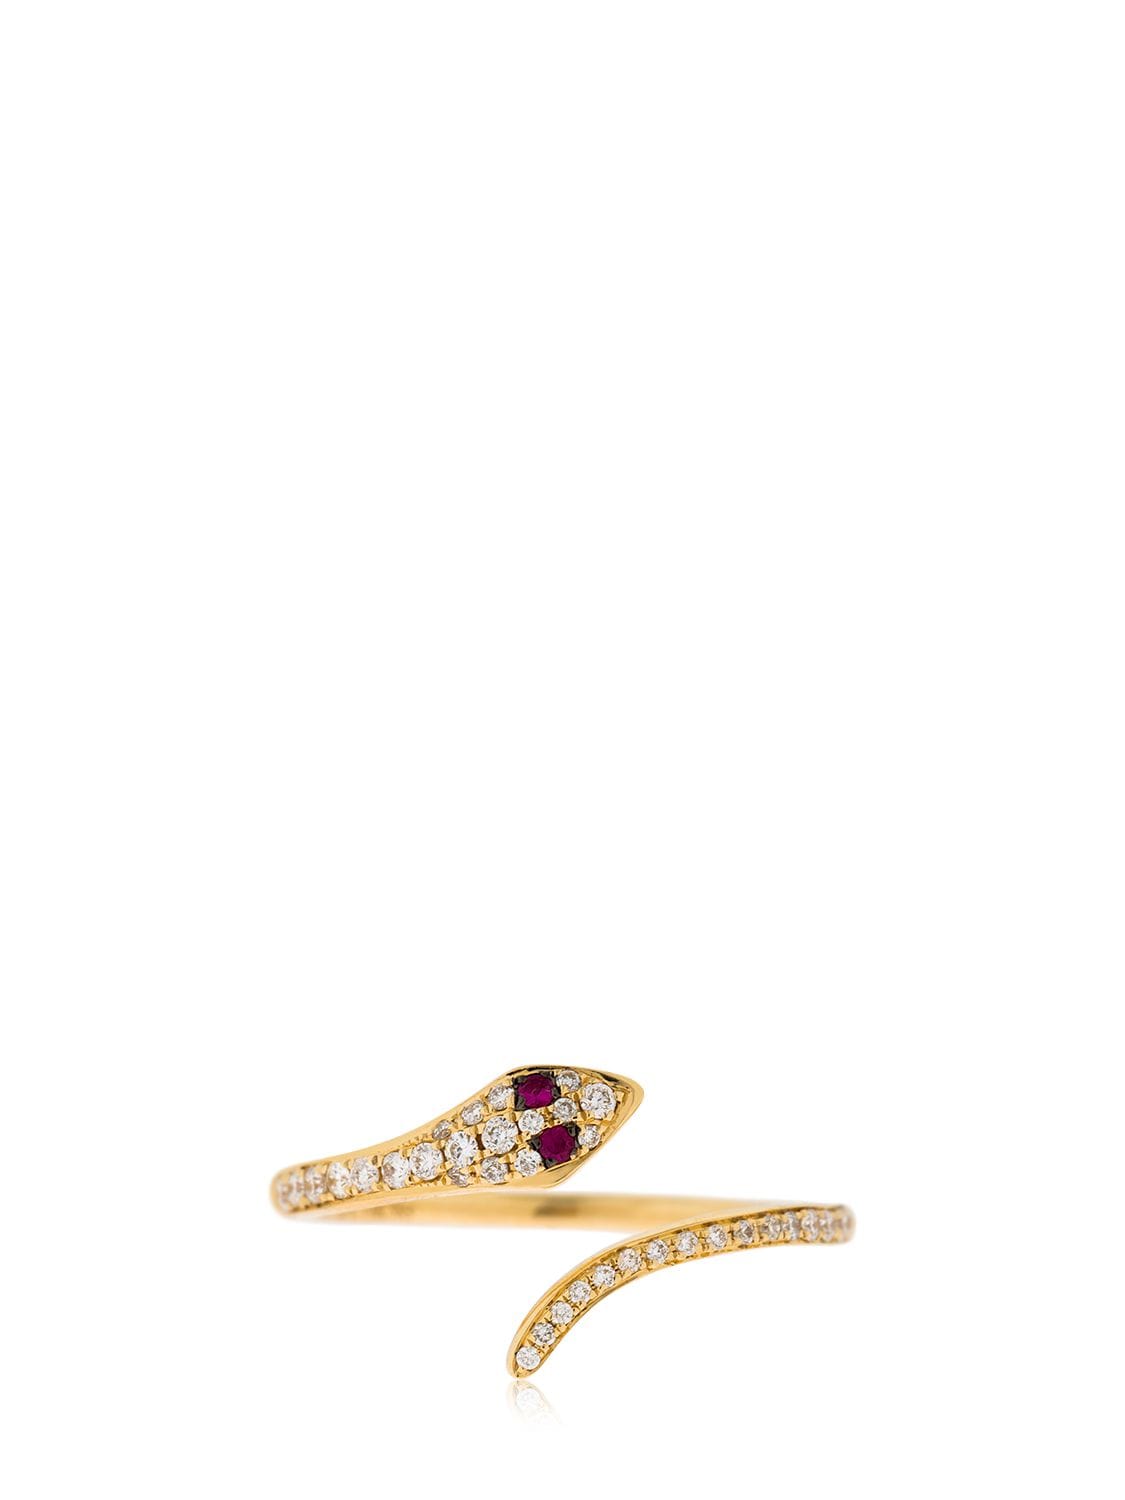 Ef Collection Diamond Snake Ring W/ Rubies In 골드